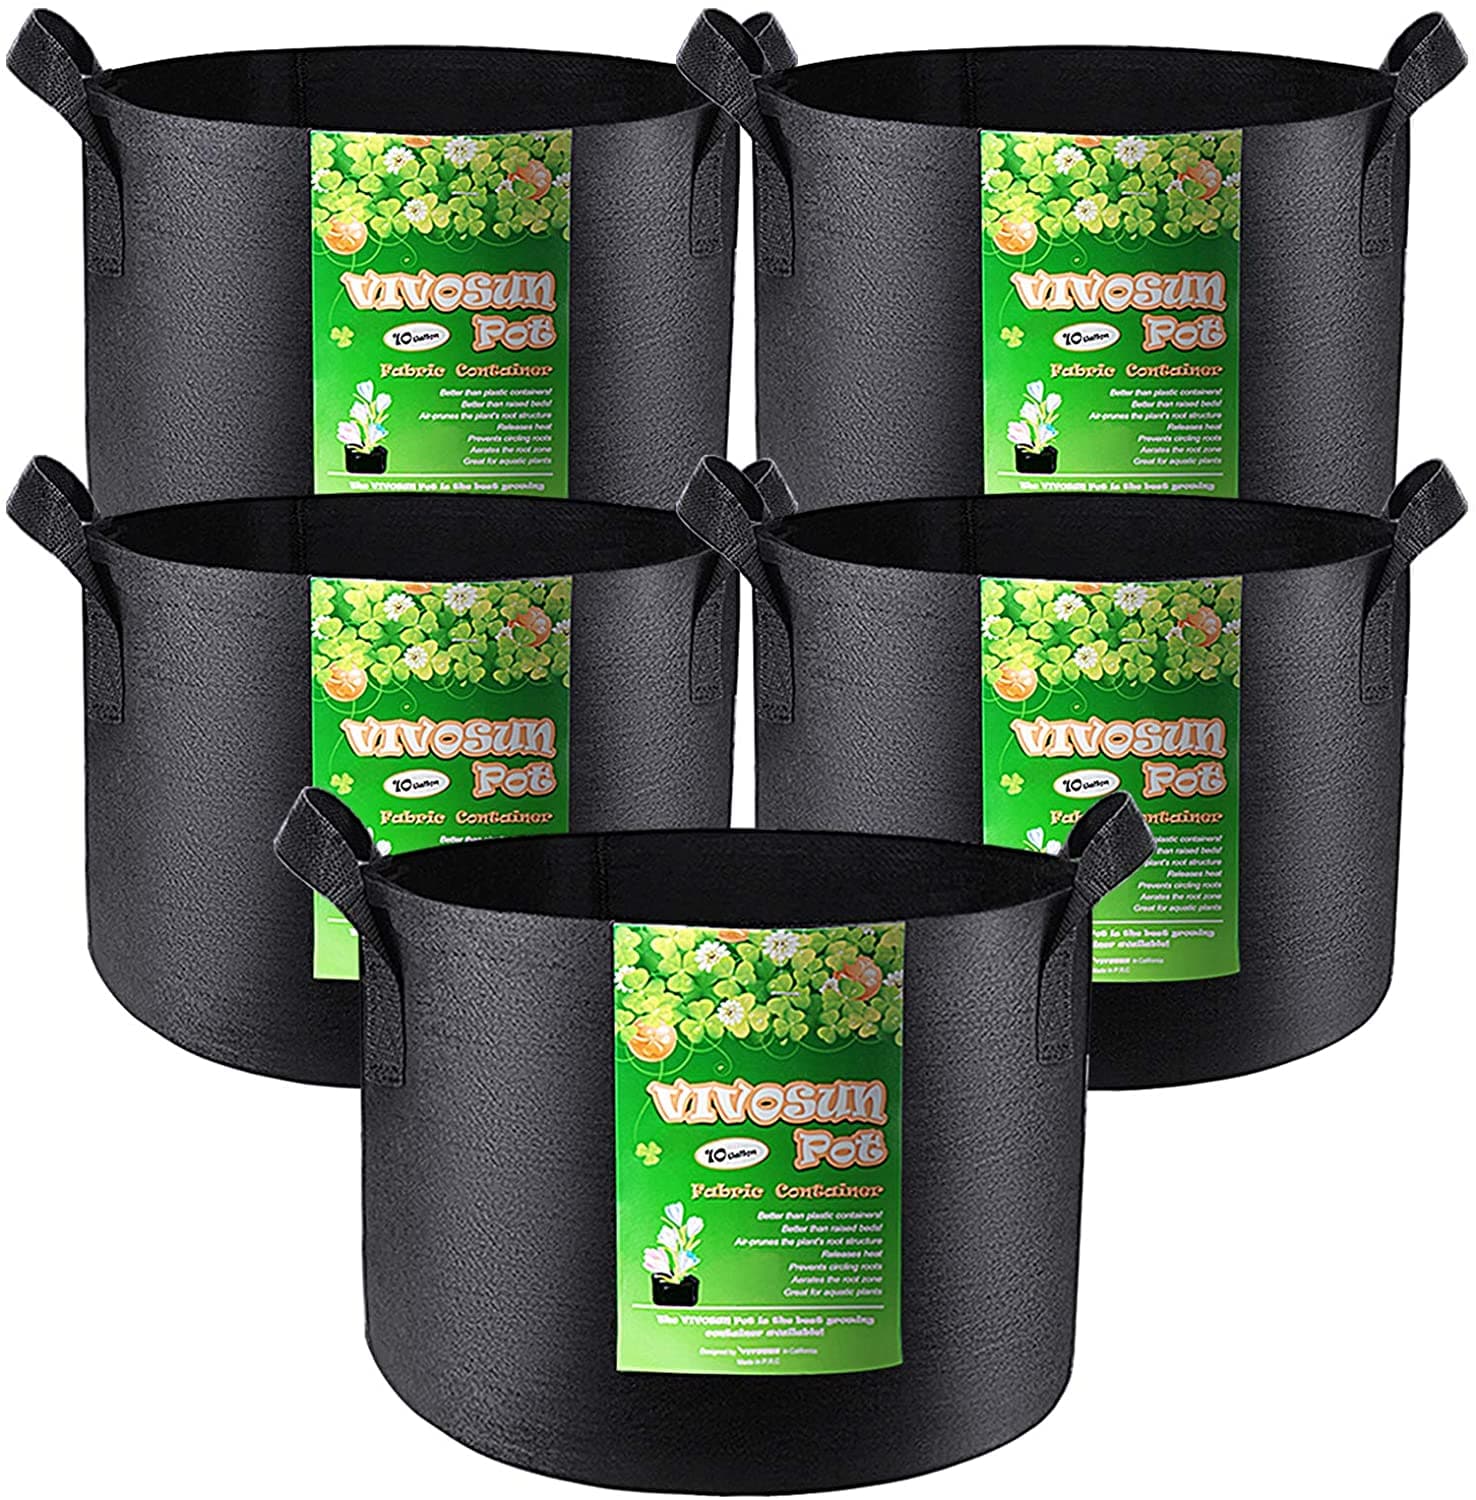 Garnen 10 Gallon Garden Grow Bags (5 Packs), Vegetable/Flower/Plant Growing  Bags, Nonwoven Fabric Pots Planter for Outdoor and Indoor Planting